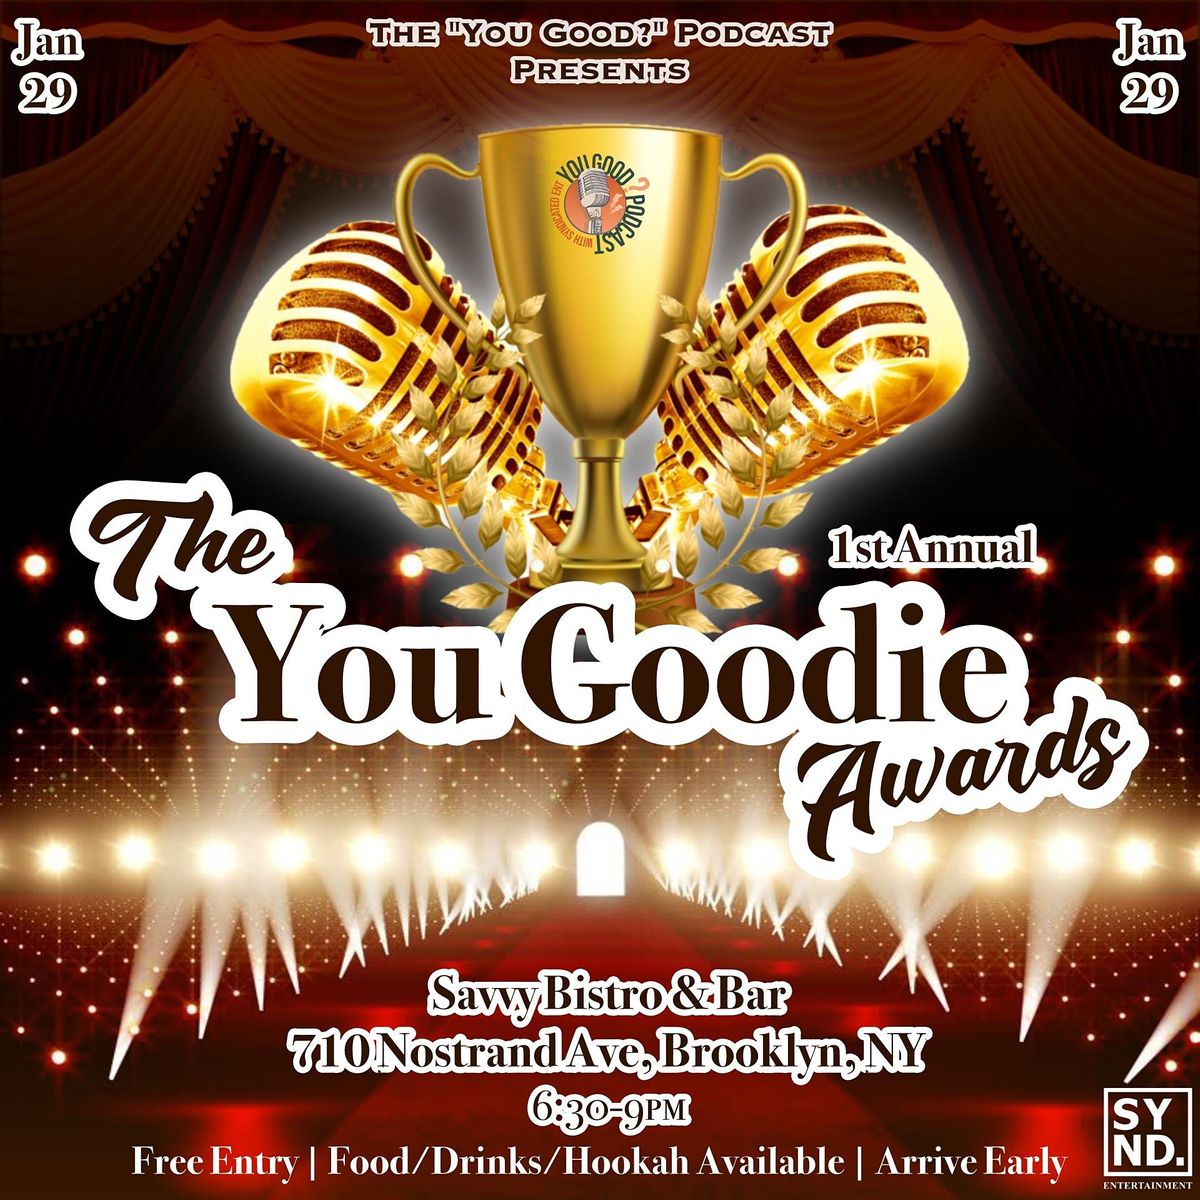 The "You Good?" Podcast Presents : The You Goodie Awards